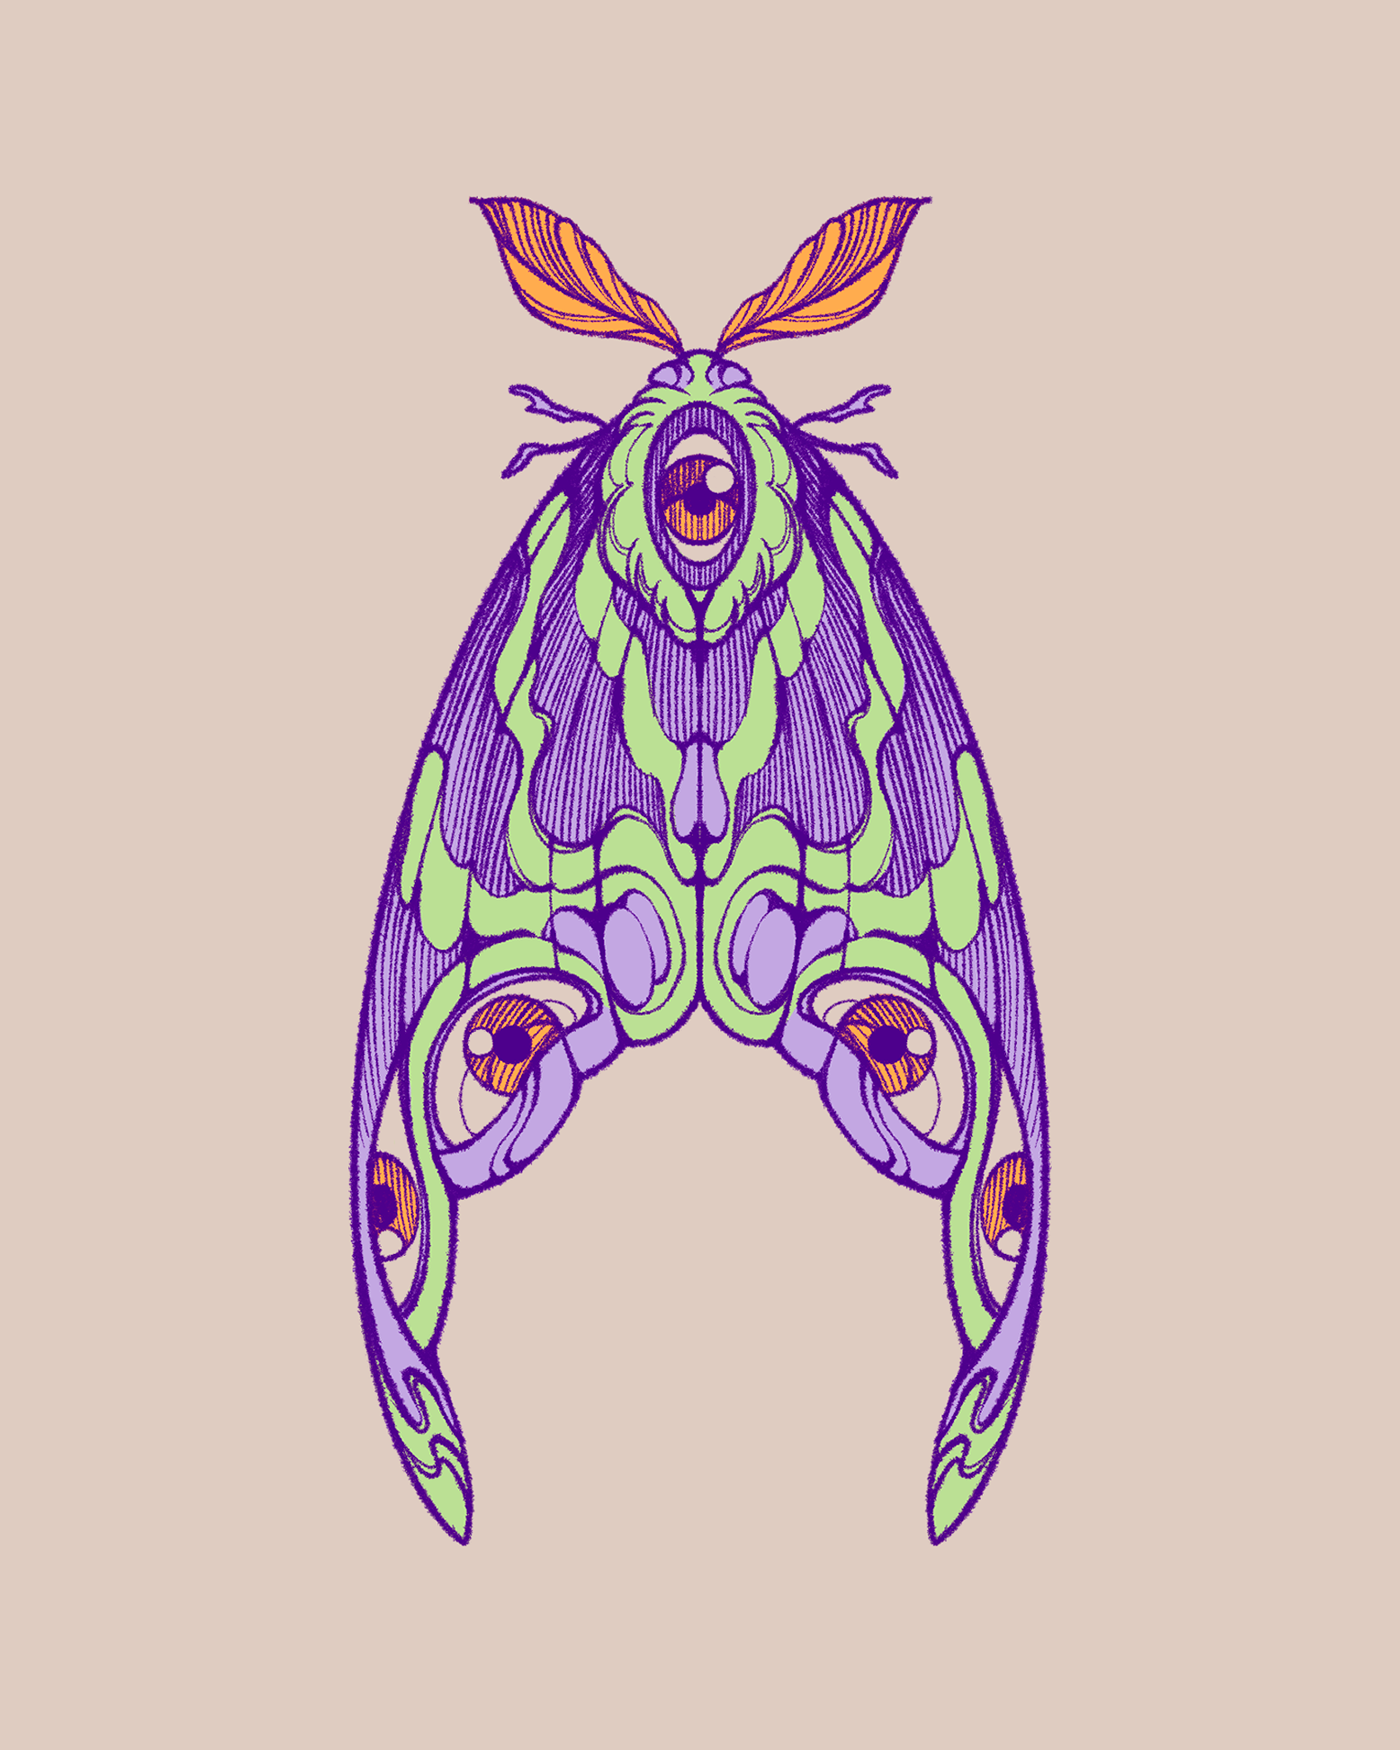 psychedelic surreal ILLUSTRATION  butterfly popsurreal mexico ilustracion Drawing  digital illustration neopsychedelia